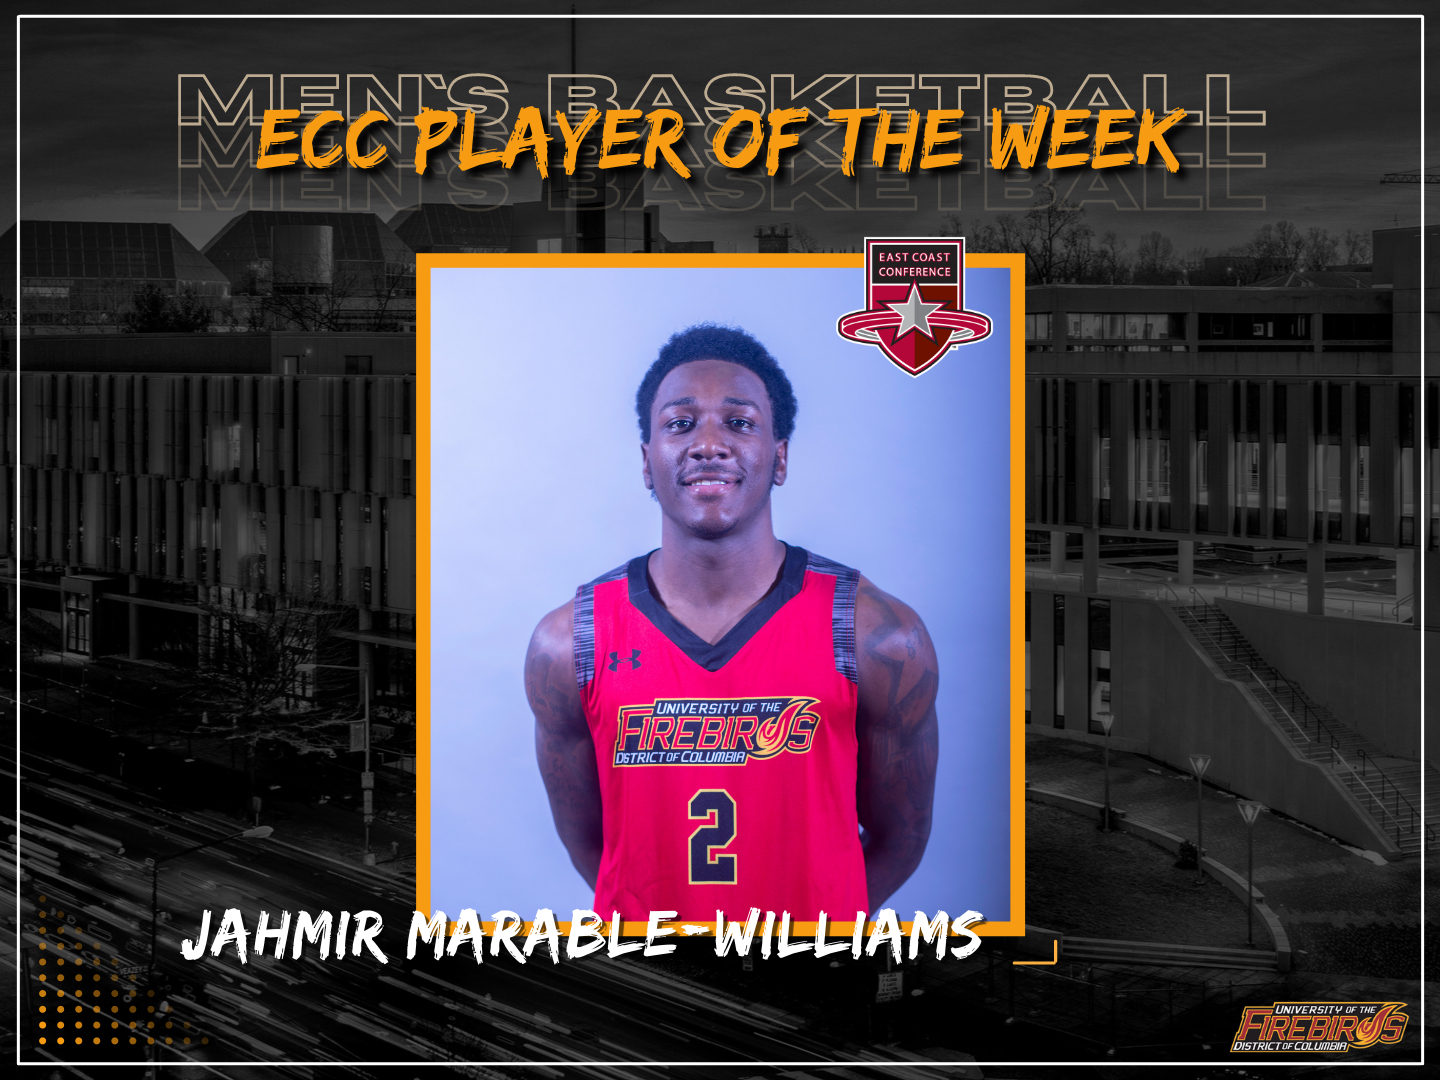 Jahmir Marable-Williams Earns Second East Coast Conference Player of the Week Honors: Three other Firebirds Make Weekly Honor Roll